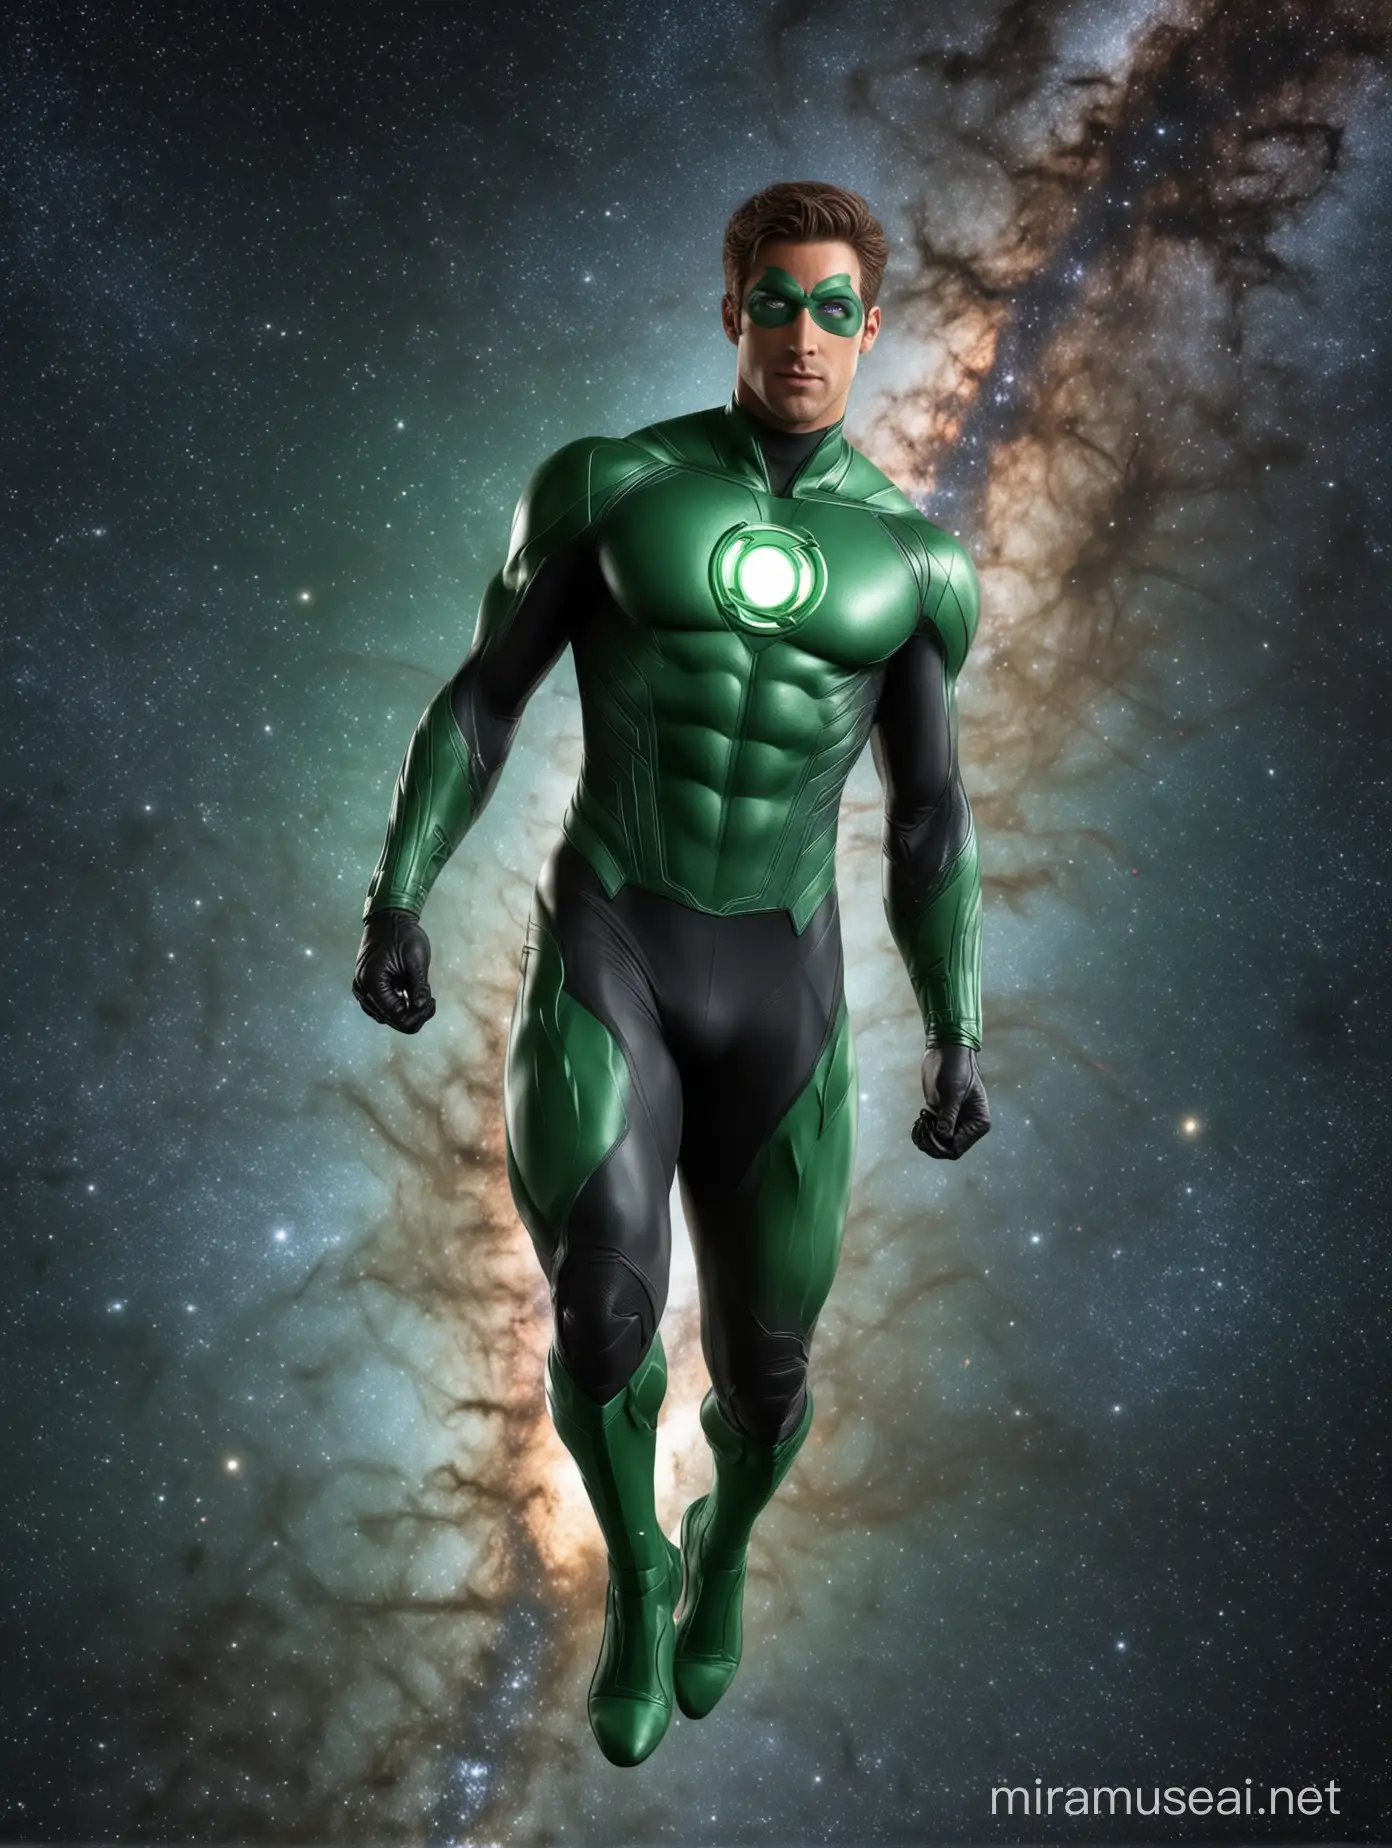 full Full body photorealistic ulra realism of picture of handsome hunky Green Lantern flying . Space and milky way as background